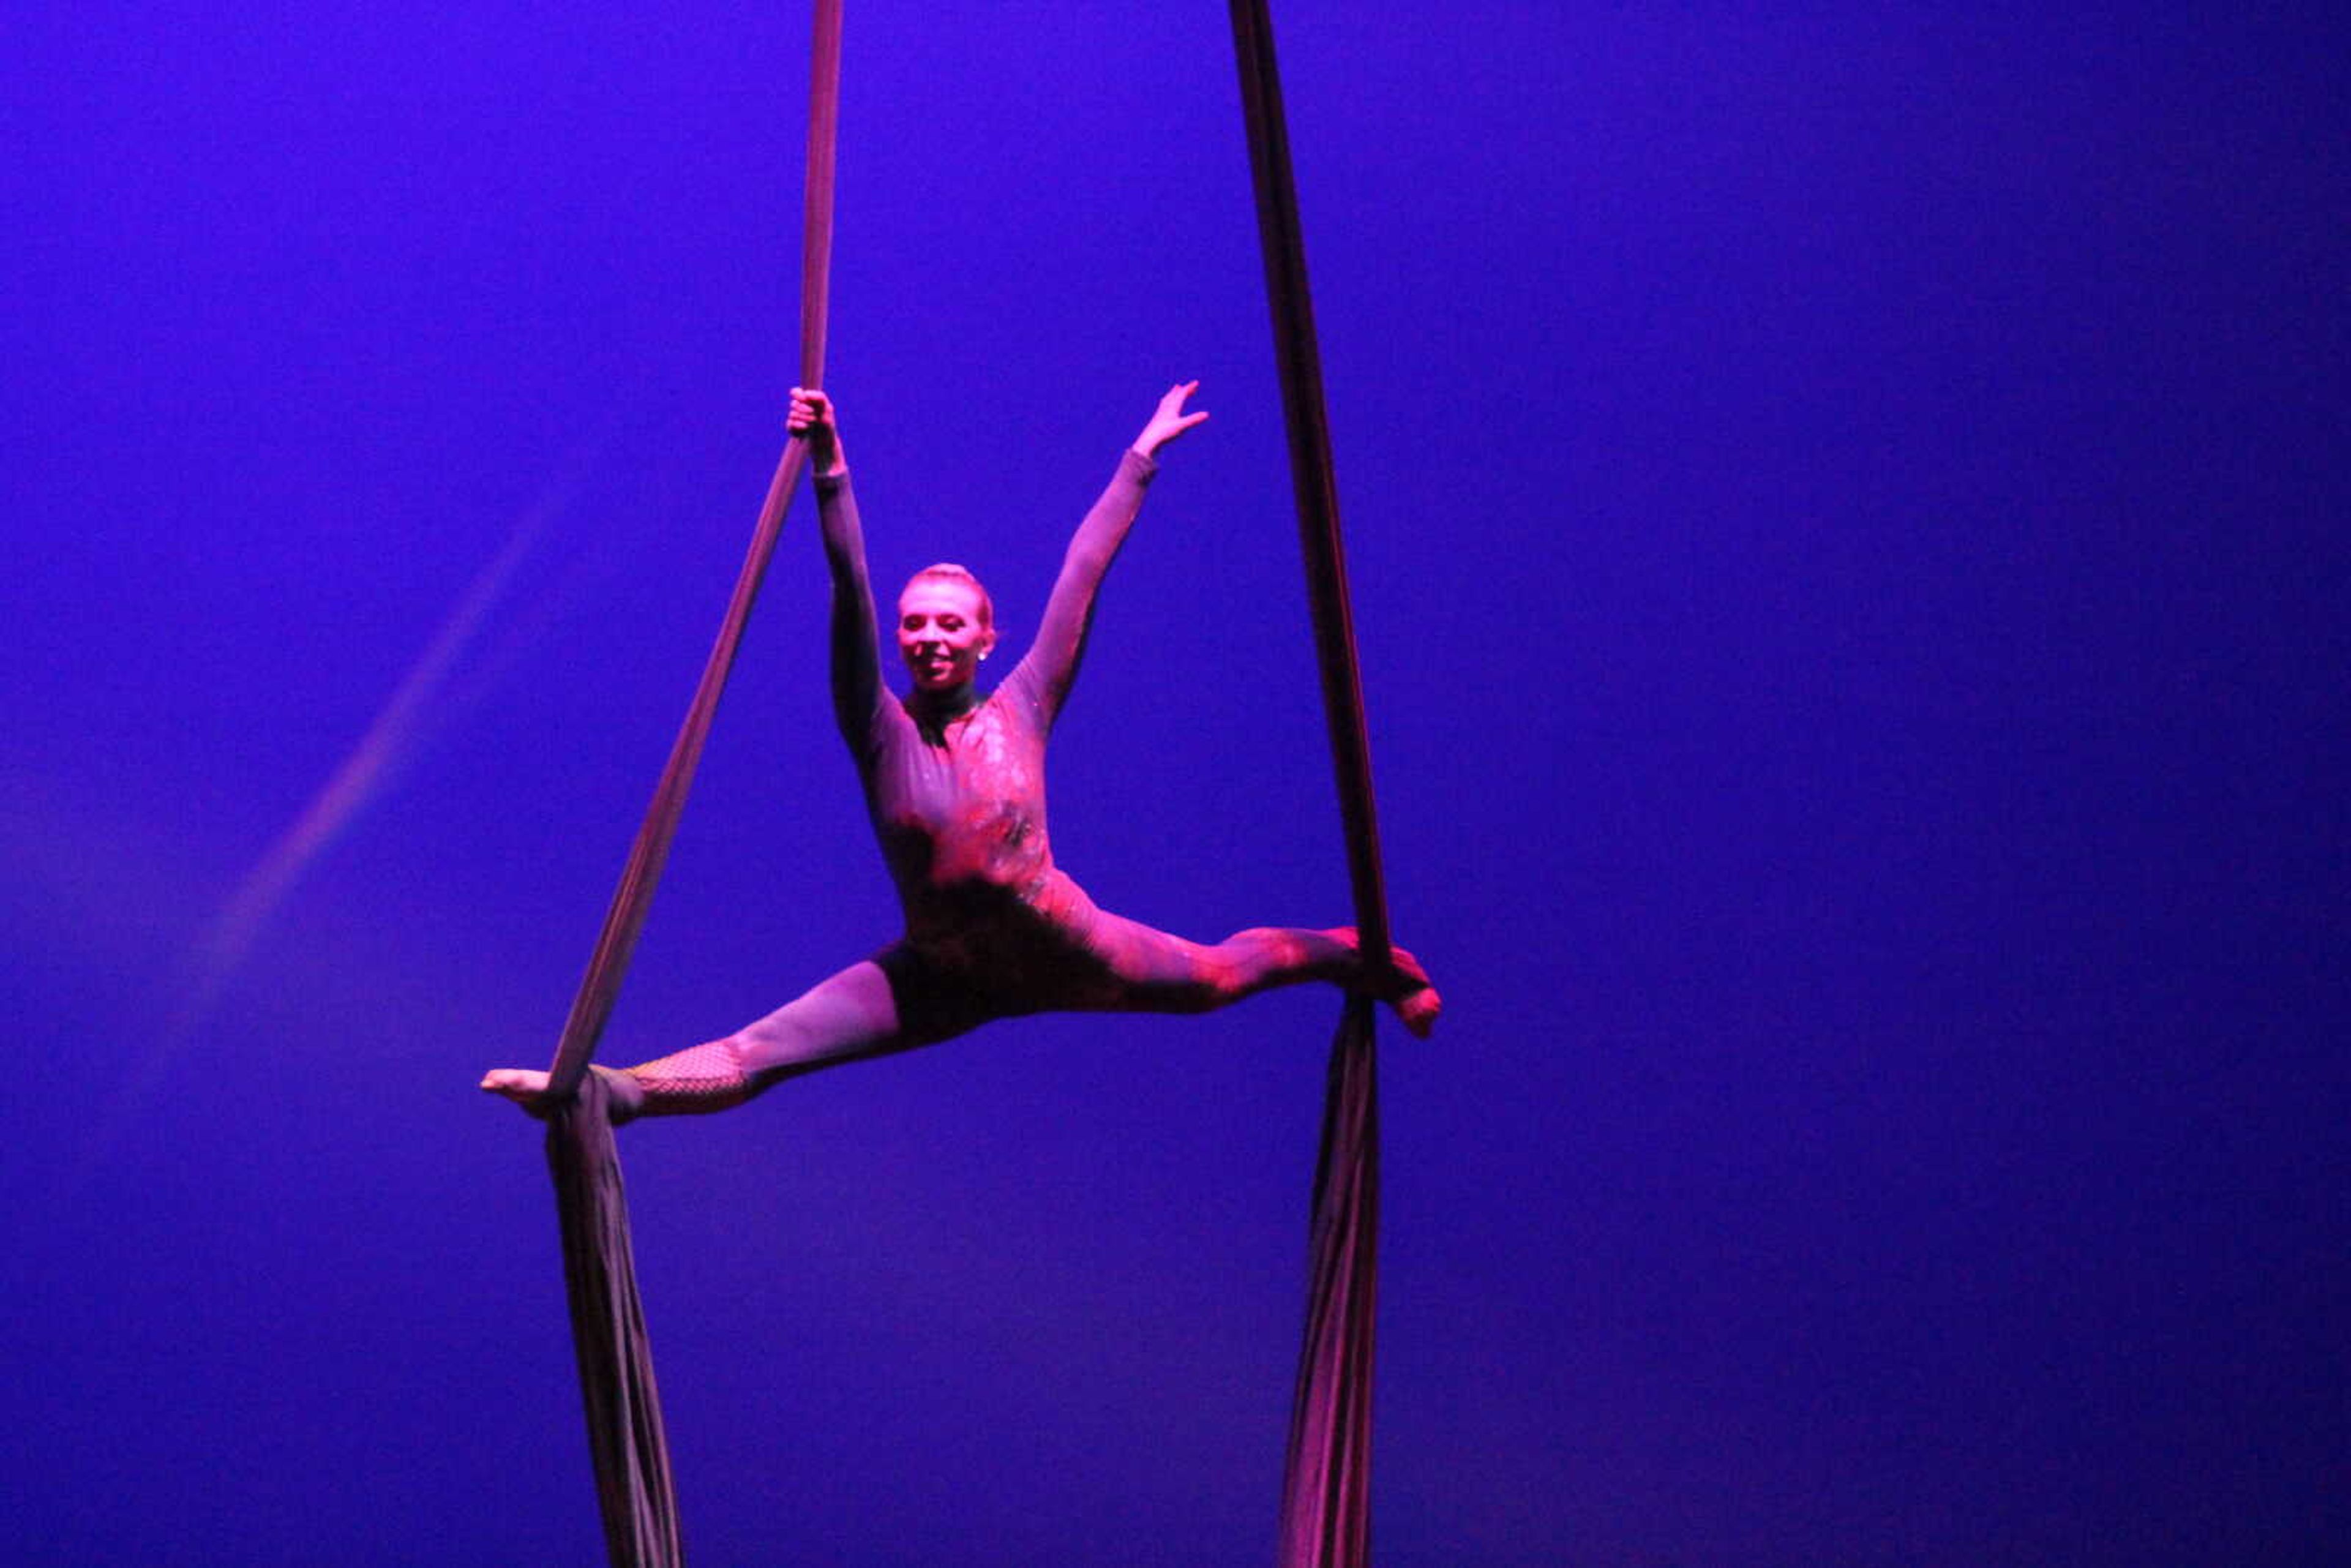 Southeast dance student performing an aerial routine "Pixel" during 'Spring into Dance' April 4 at Bedell Performance Hall.